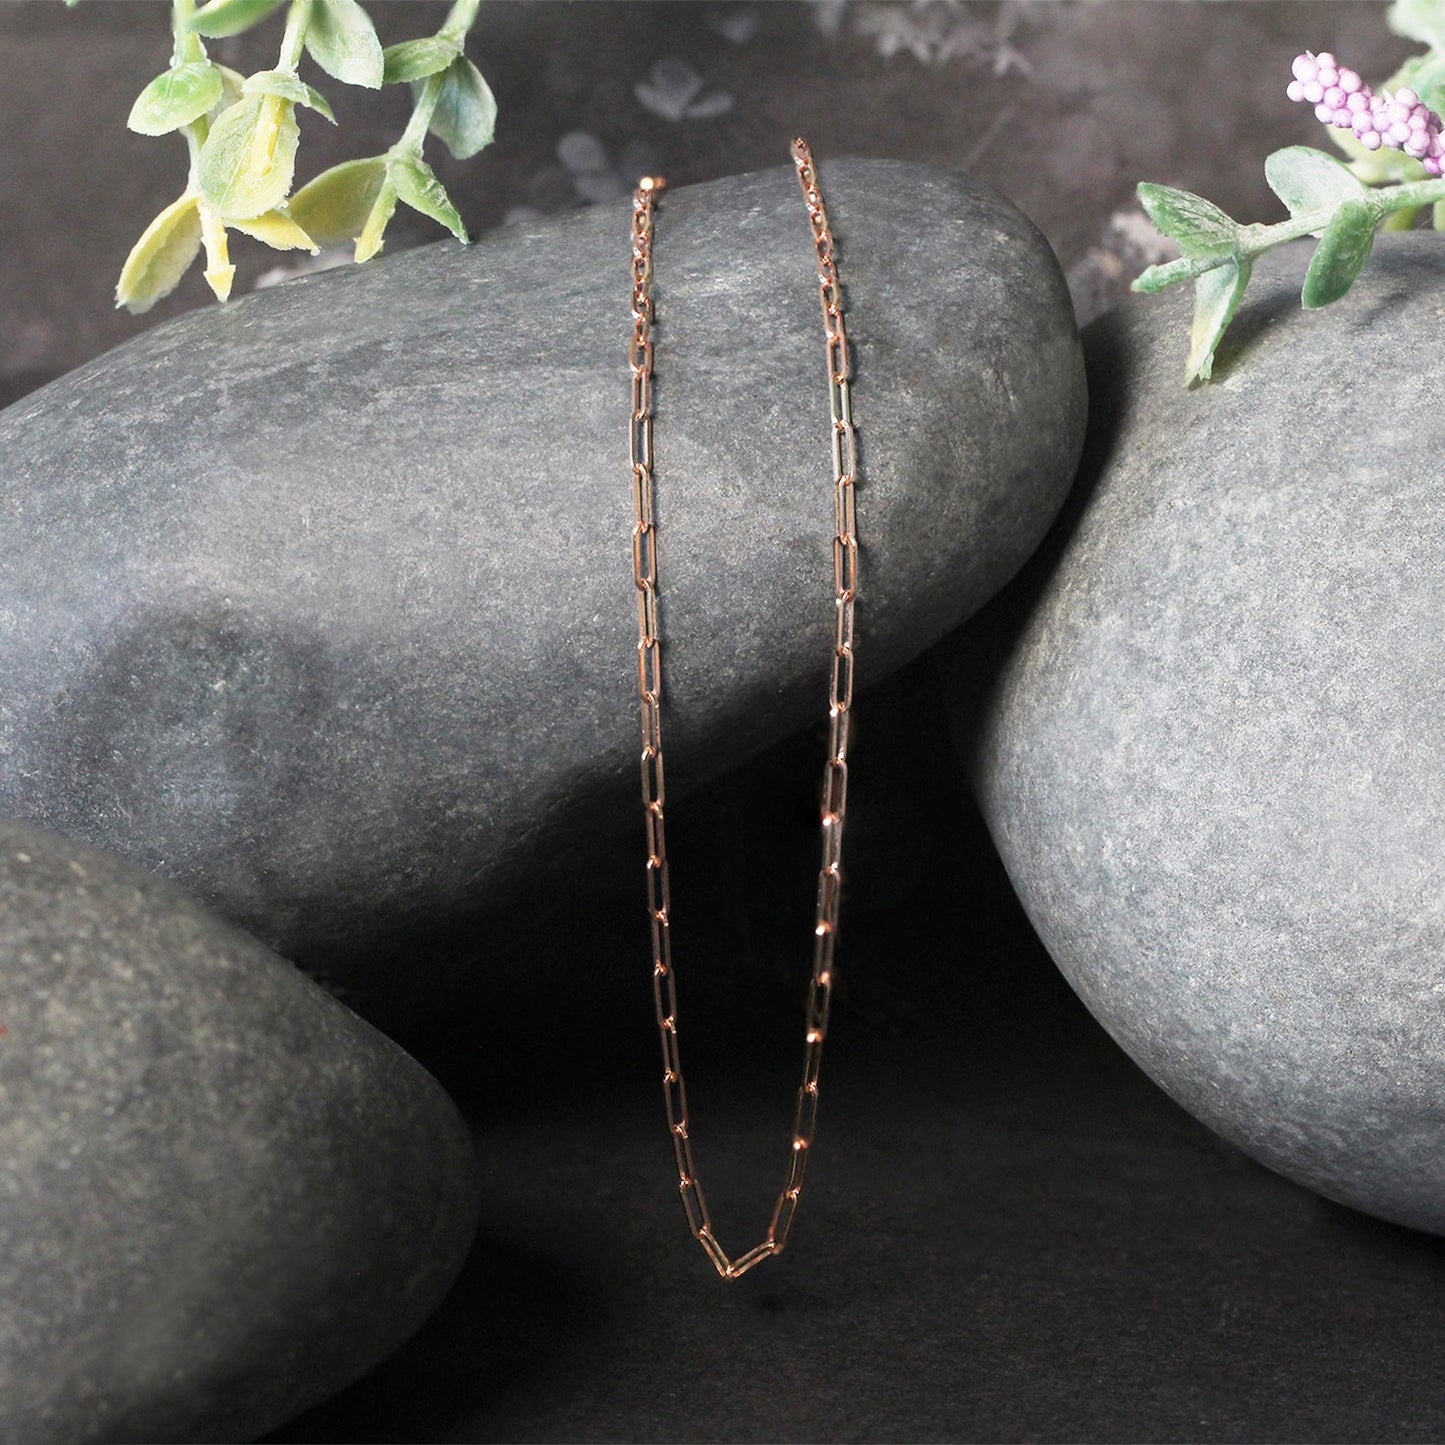 14K Rose Gold Fine Paperclip Chain (1.5mm)